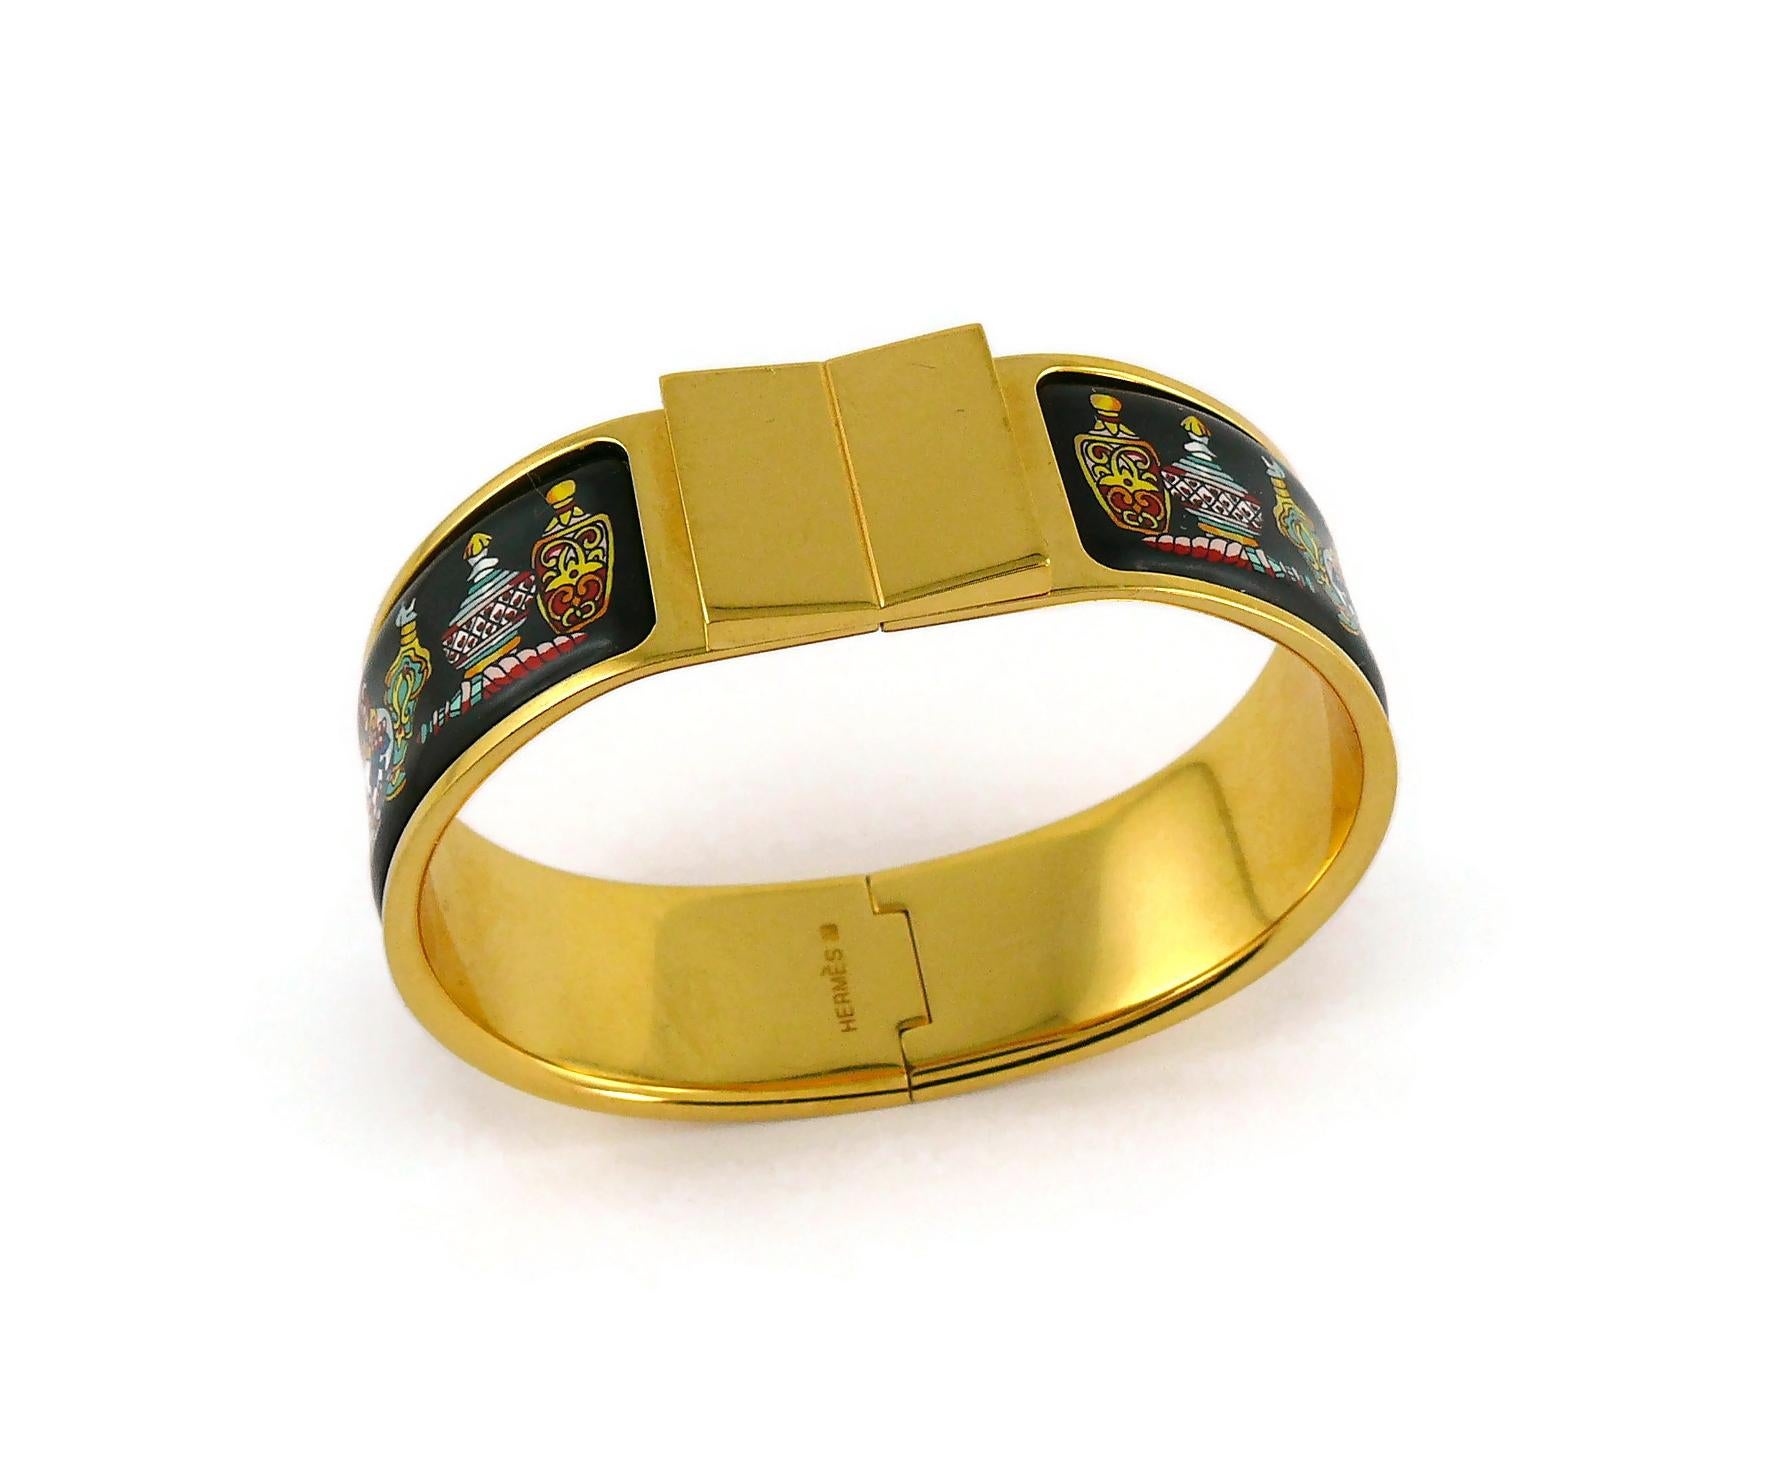 HERMES vintage printed enamel gold toned loquet bracelet featuring multicolored flacons after the design of CATHERINE BASCHET for the Maison HERMES silk scarf 